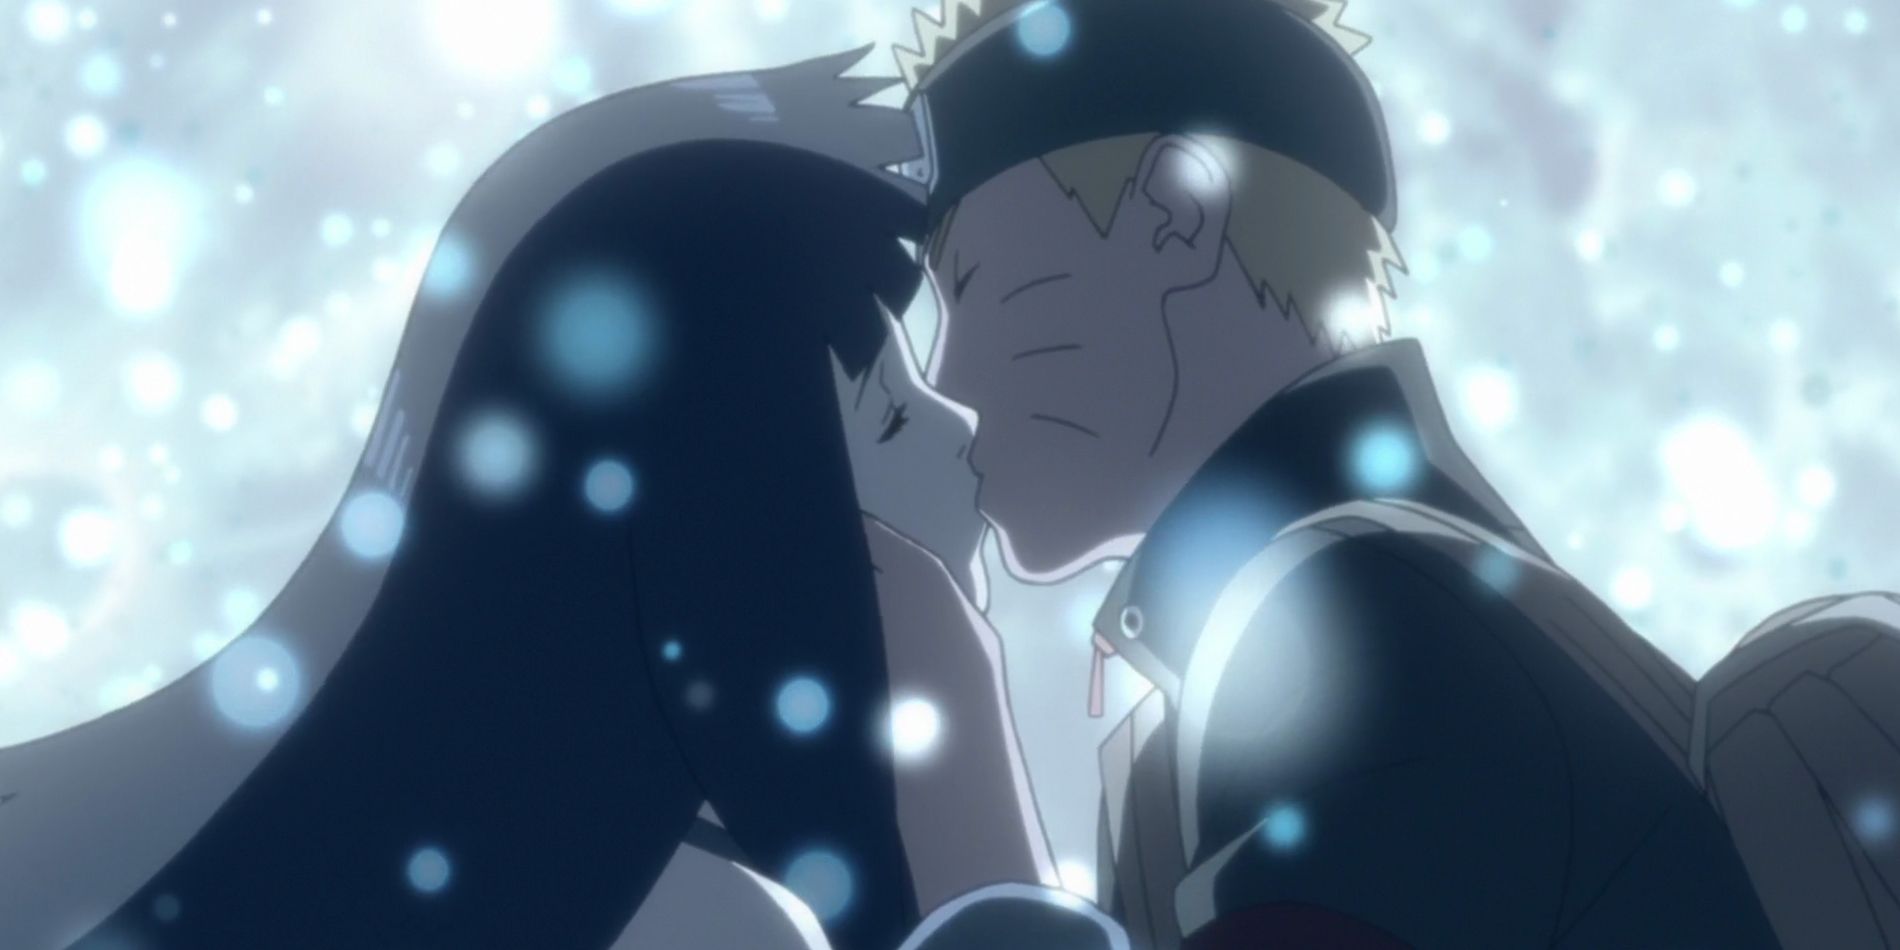 Who was Naruto's second kiss?